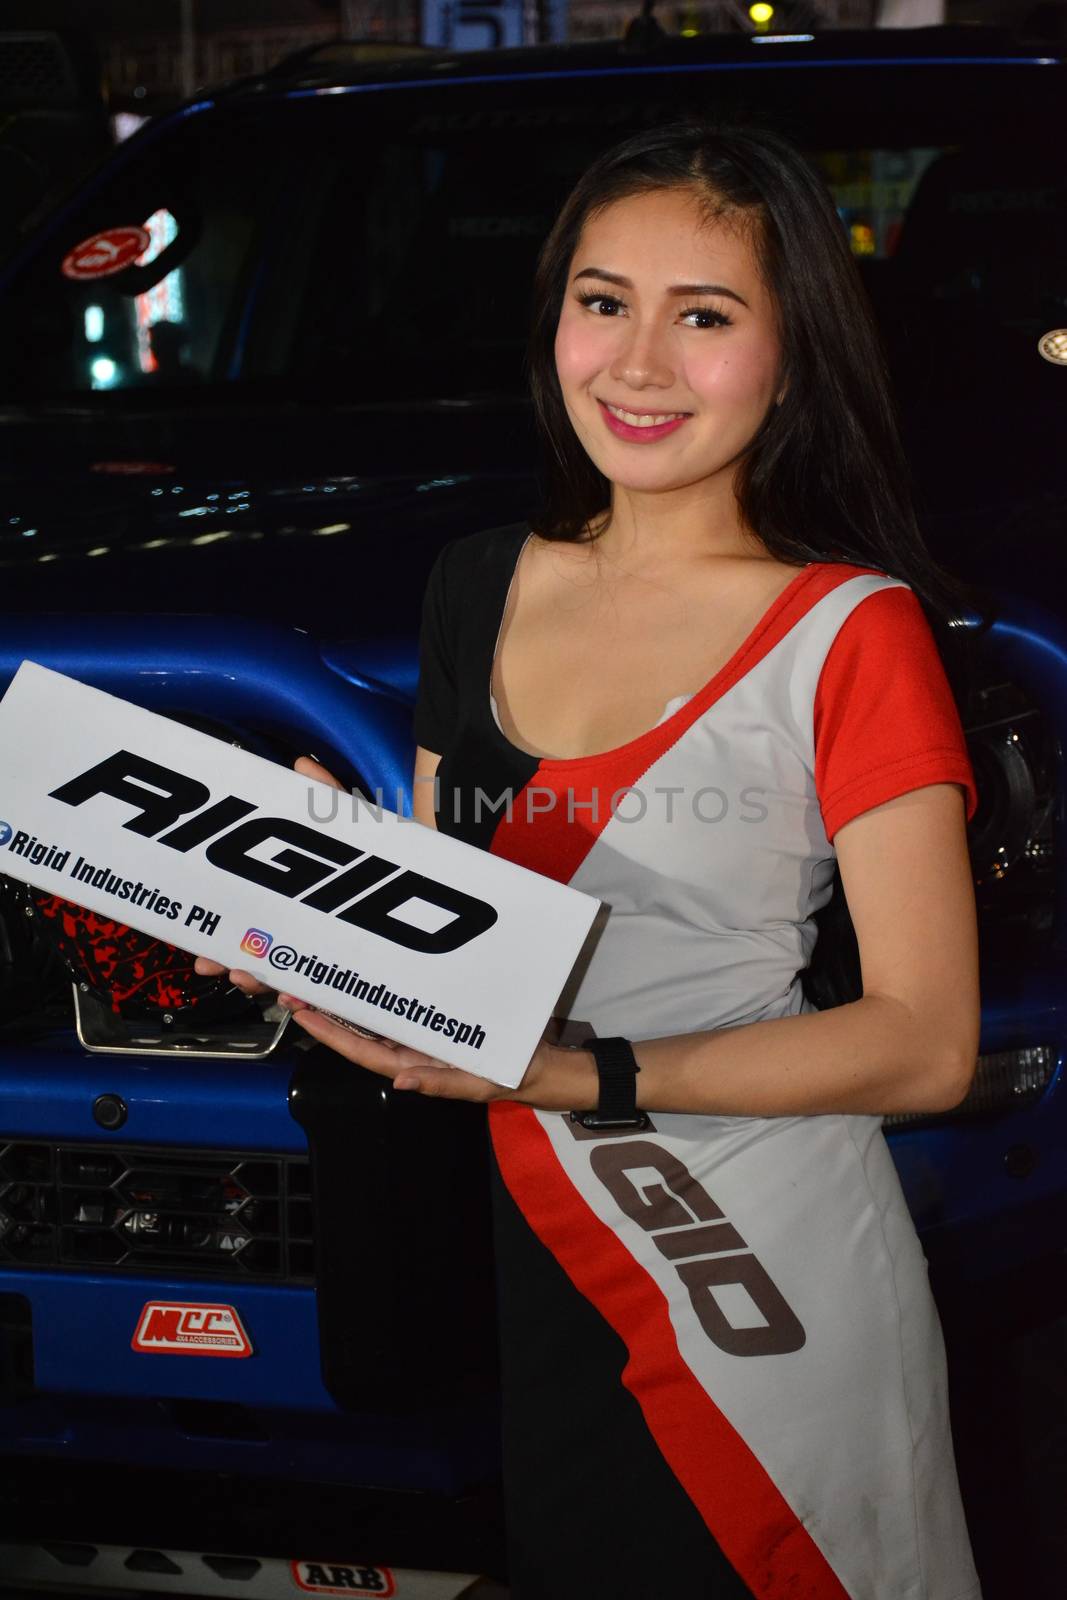 PASAY, PH - DEC. 7: Rigid Industries female model at Bumper to Bumper 15 on December 7, 2019 in Mall of Asia Concert Grounds, Pasay, Philippines. Bumper to Bumper is a annual aftermarket car show event in the Philippines.